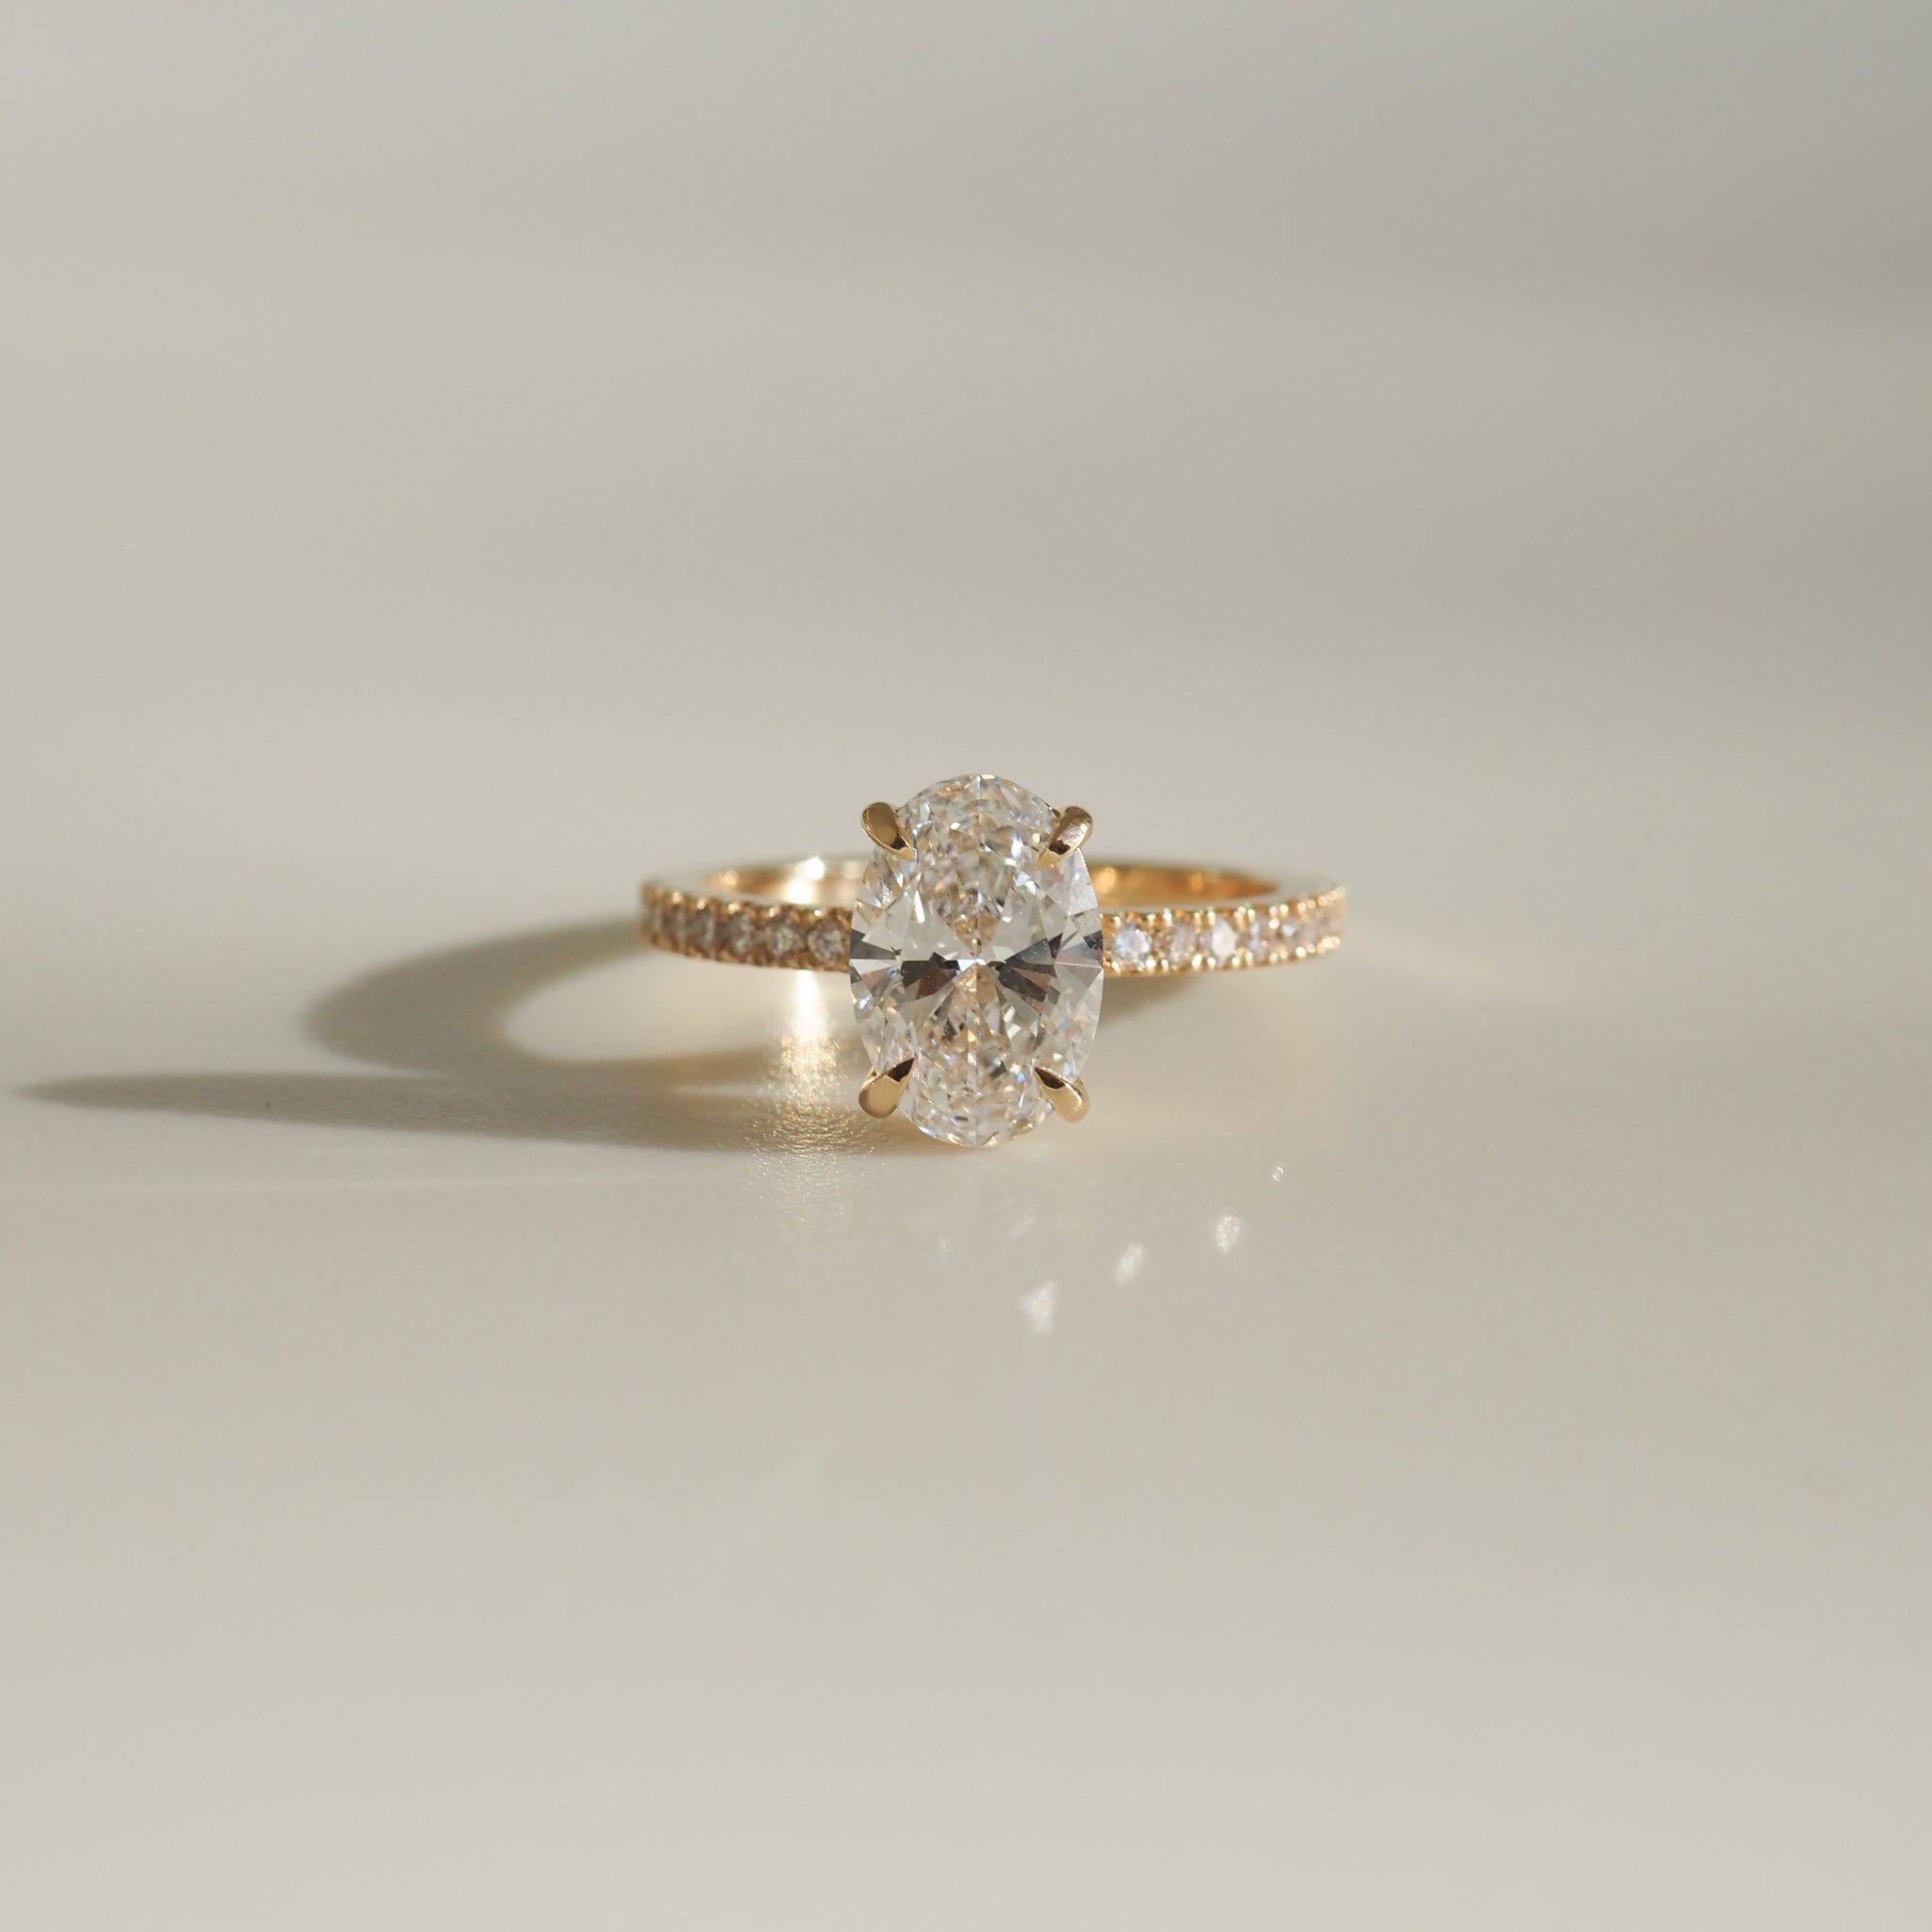 Clara | 1.54ct Oval Diamond Engagement Ring Ready To Wear